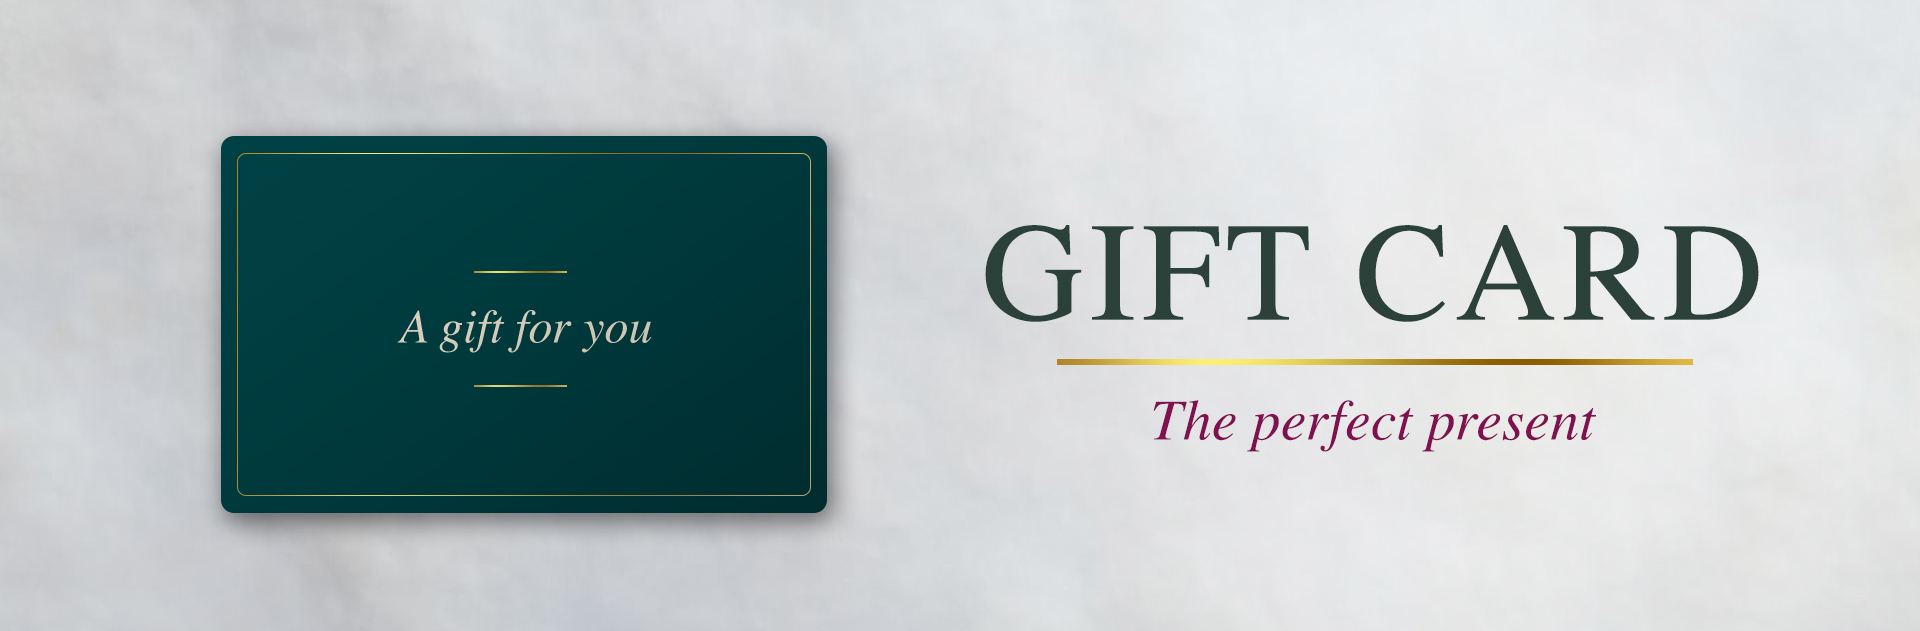 The Essex Arms Gift Card